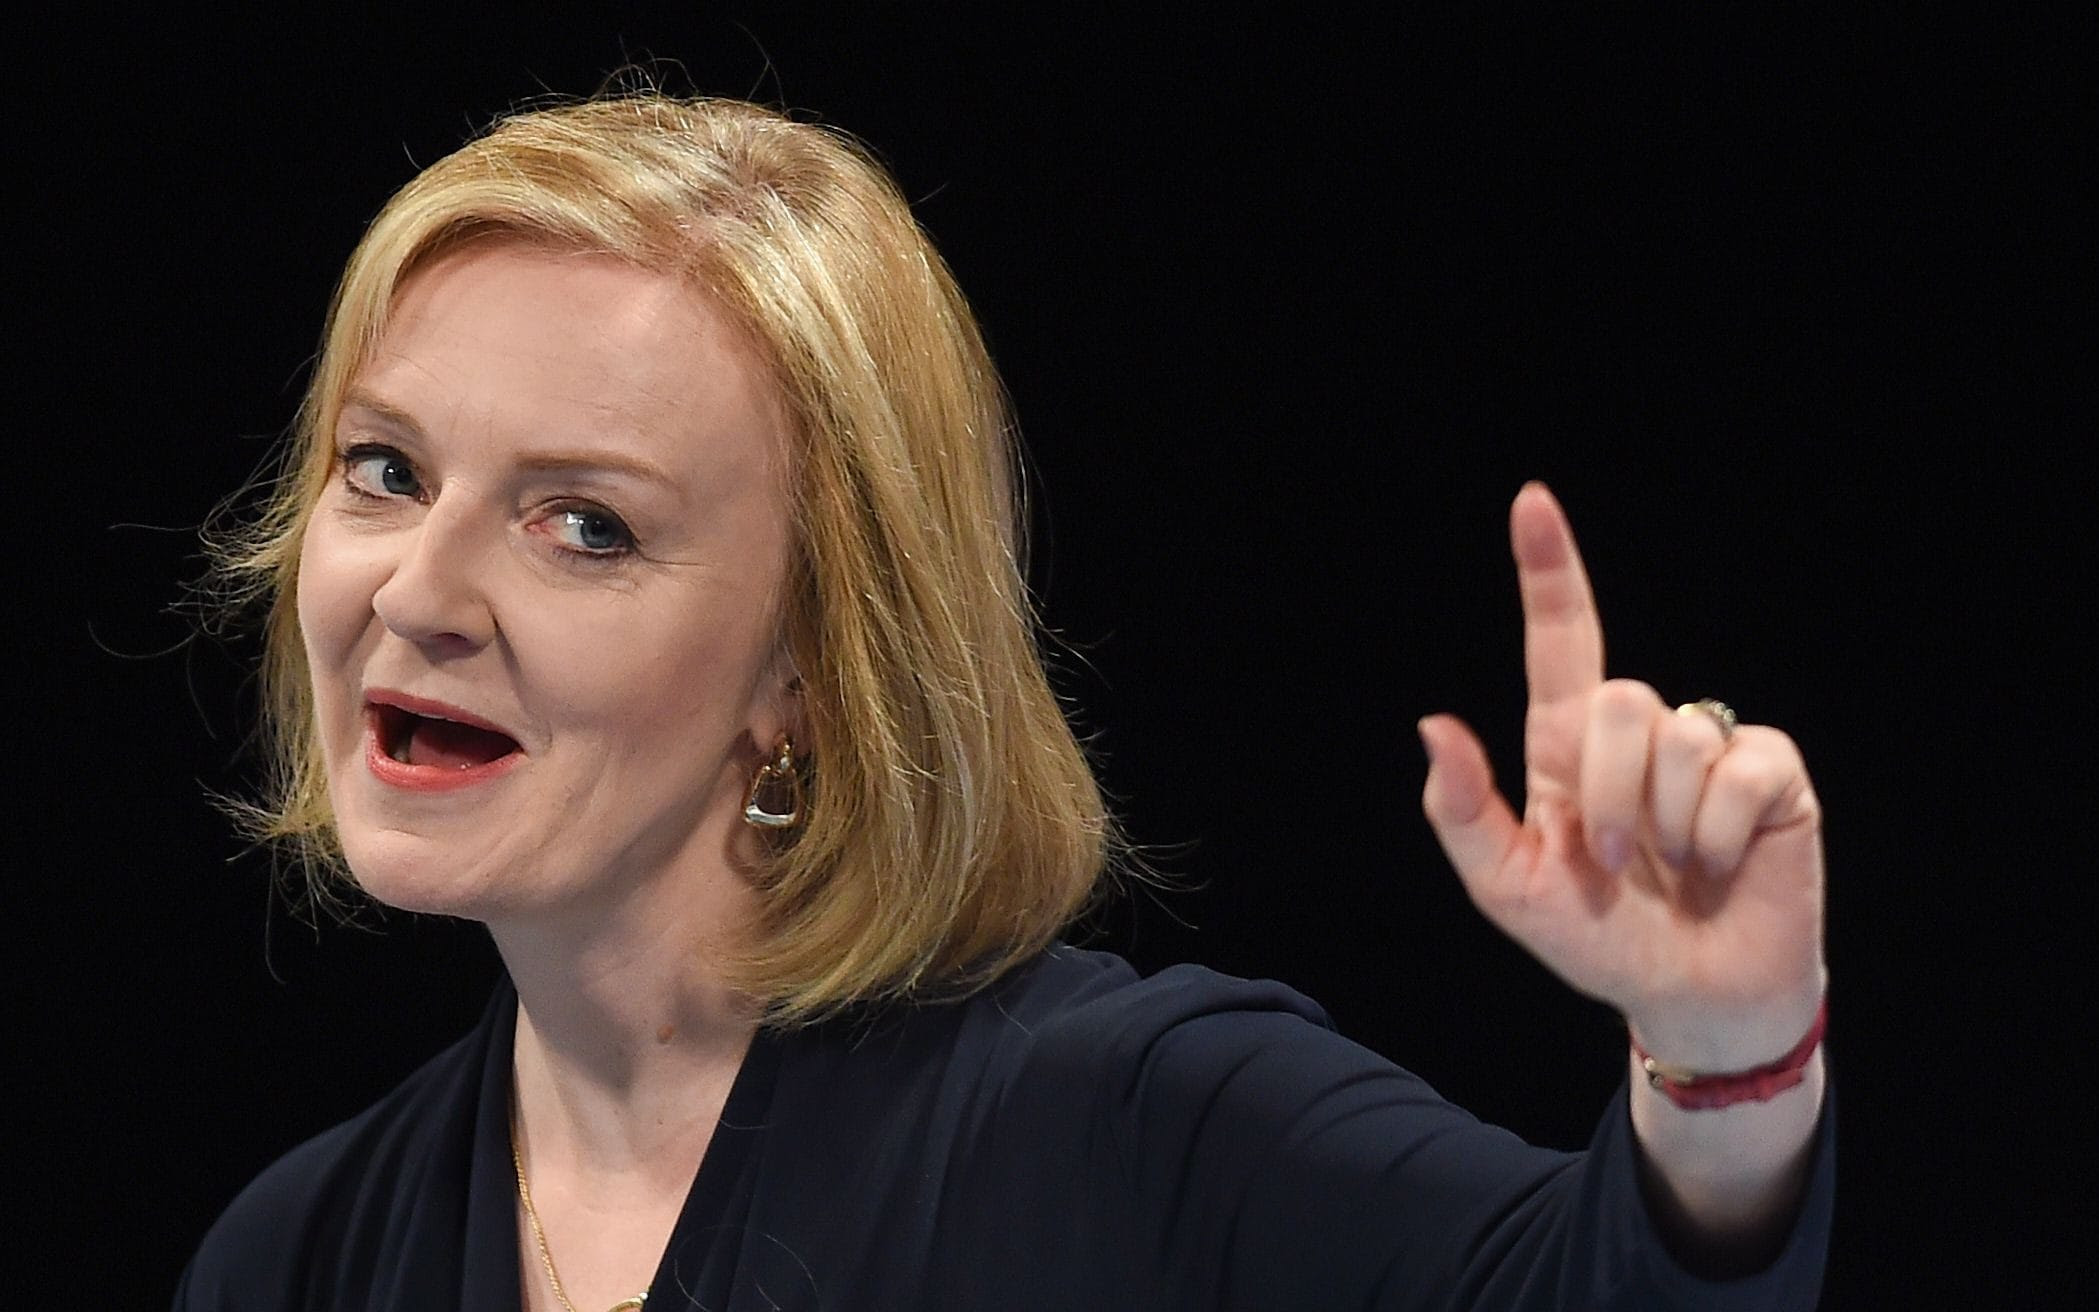 Liz Truss might come to regret suggesting 10-year-olds should vote